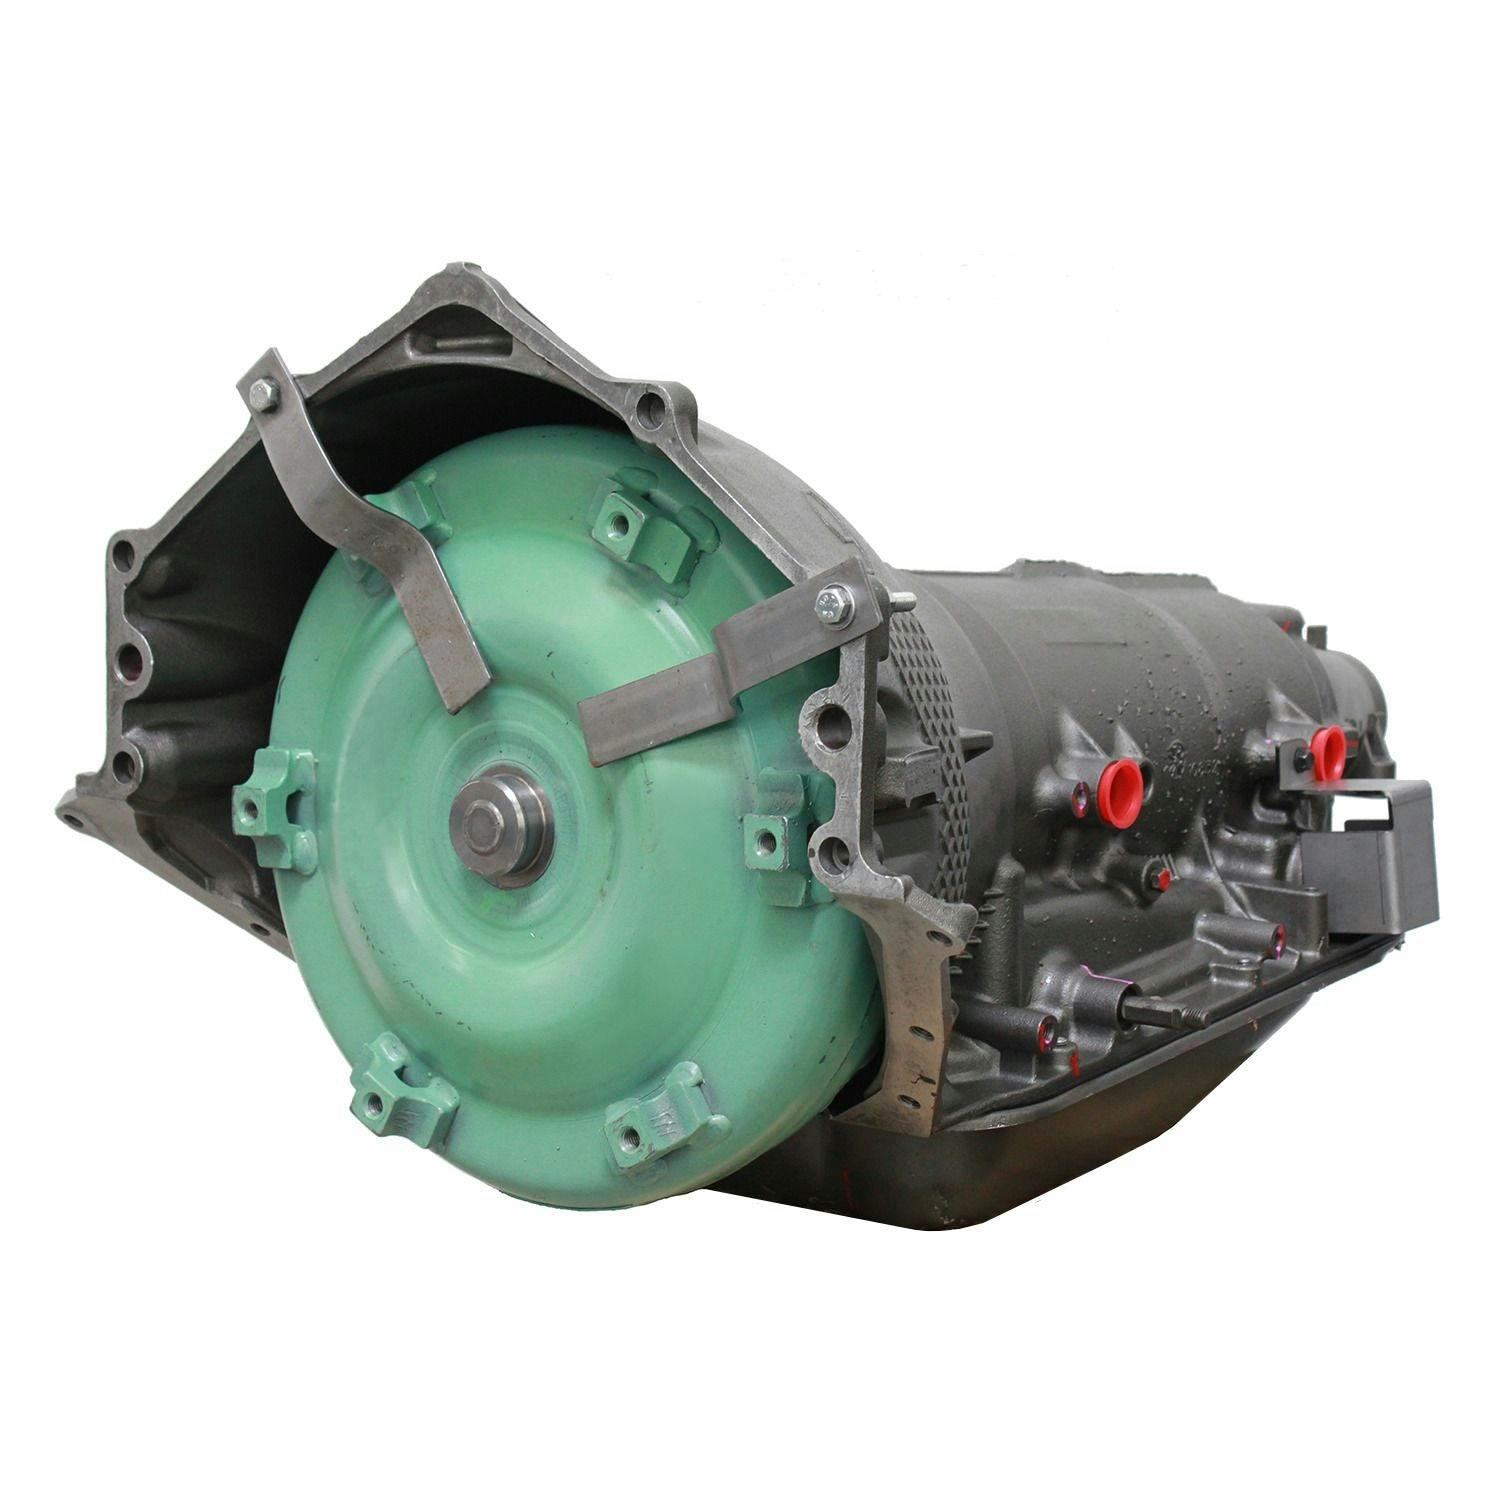 Automatic Transmission for 1997-1998 Chevrolet C2500 Suburban/Express 1500, 2500, 3500 and GMC C2500 Suburban/Savana 1500, 2500, 3500 RWD with 4.3/5.7/7.4L Engine